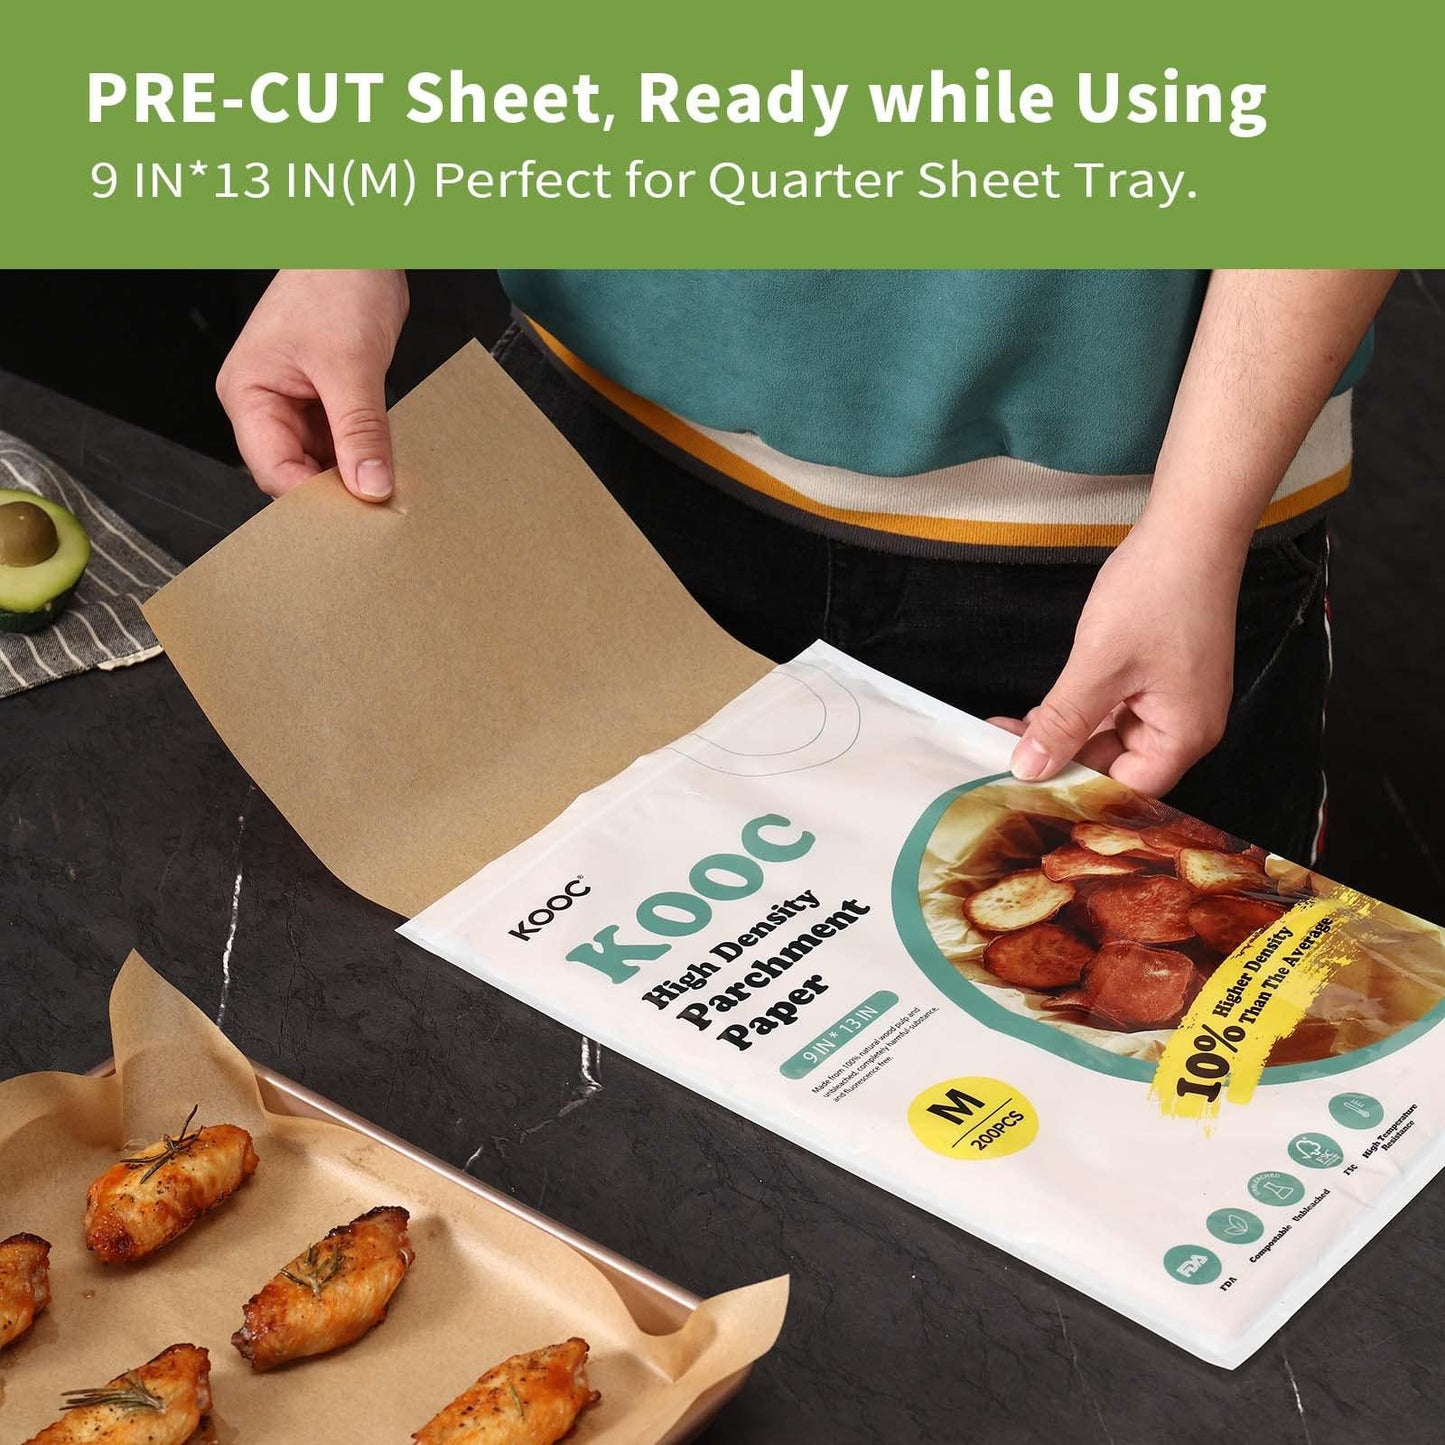 KOOC Premium 200-Pack 9x13 Inch Parchment Paper Sheets - Precut Unbleached Baking Paper - High Density & Compostable - Non-Stick - Ideal for Oven, Microwave, Air Fryer - Cooking and Baking Essential - CookCave